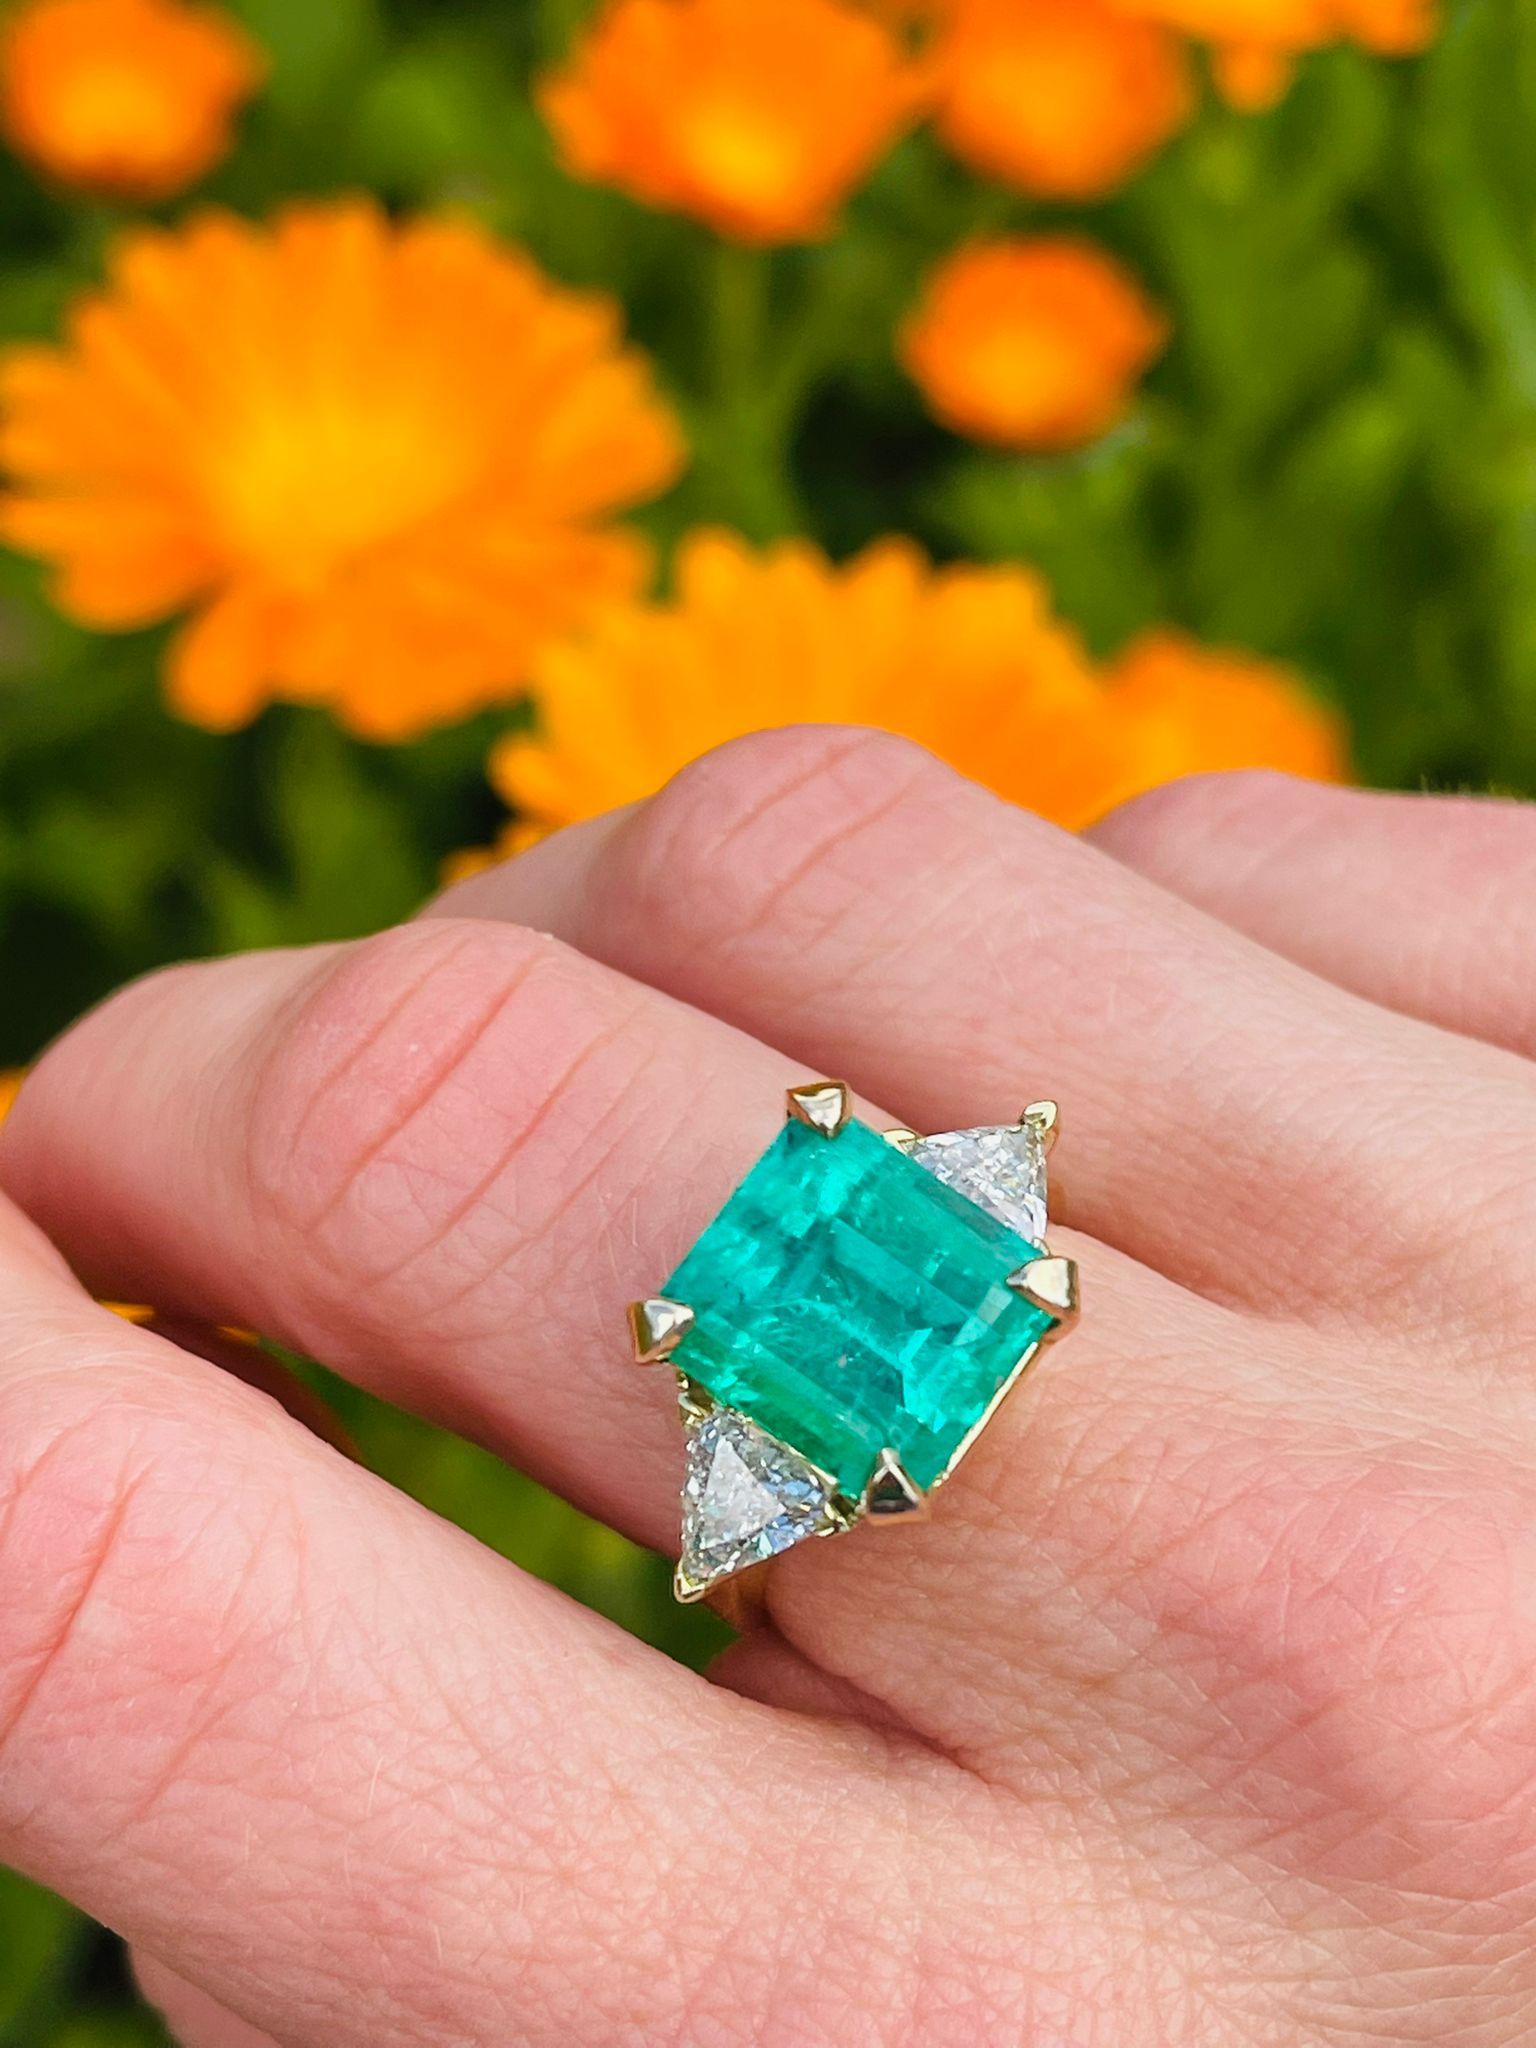 18kt yellow gold ladies ring with Natural 6.15 carat Colombian emerald and trillion-cut diamonds.
Comes with GIA Certificate.

Dimensions -
Weight : 7.75 grams
Finger Size (UK) = O (US) = 7 1/2 (EU) = 55 1/4
Size :3.0 x 2.2 x 1.3 cm

Emerald